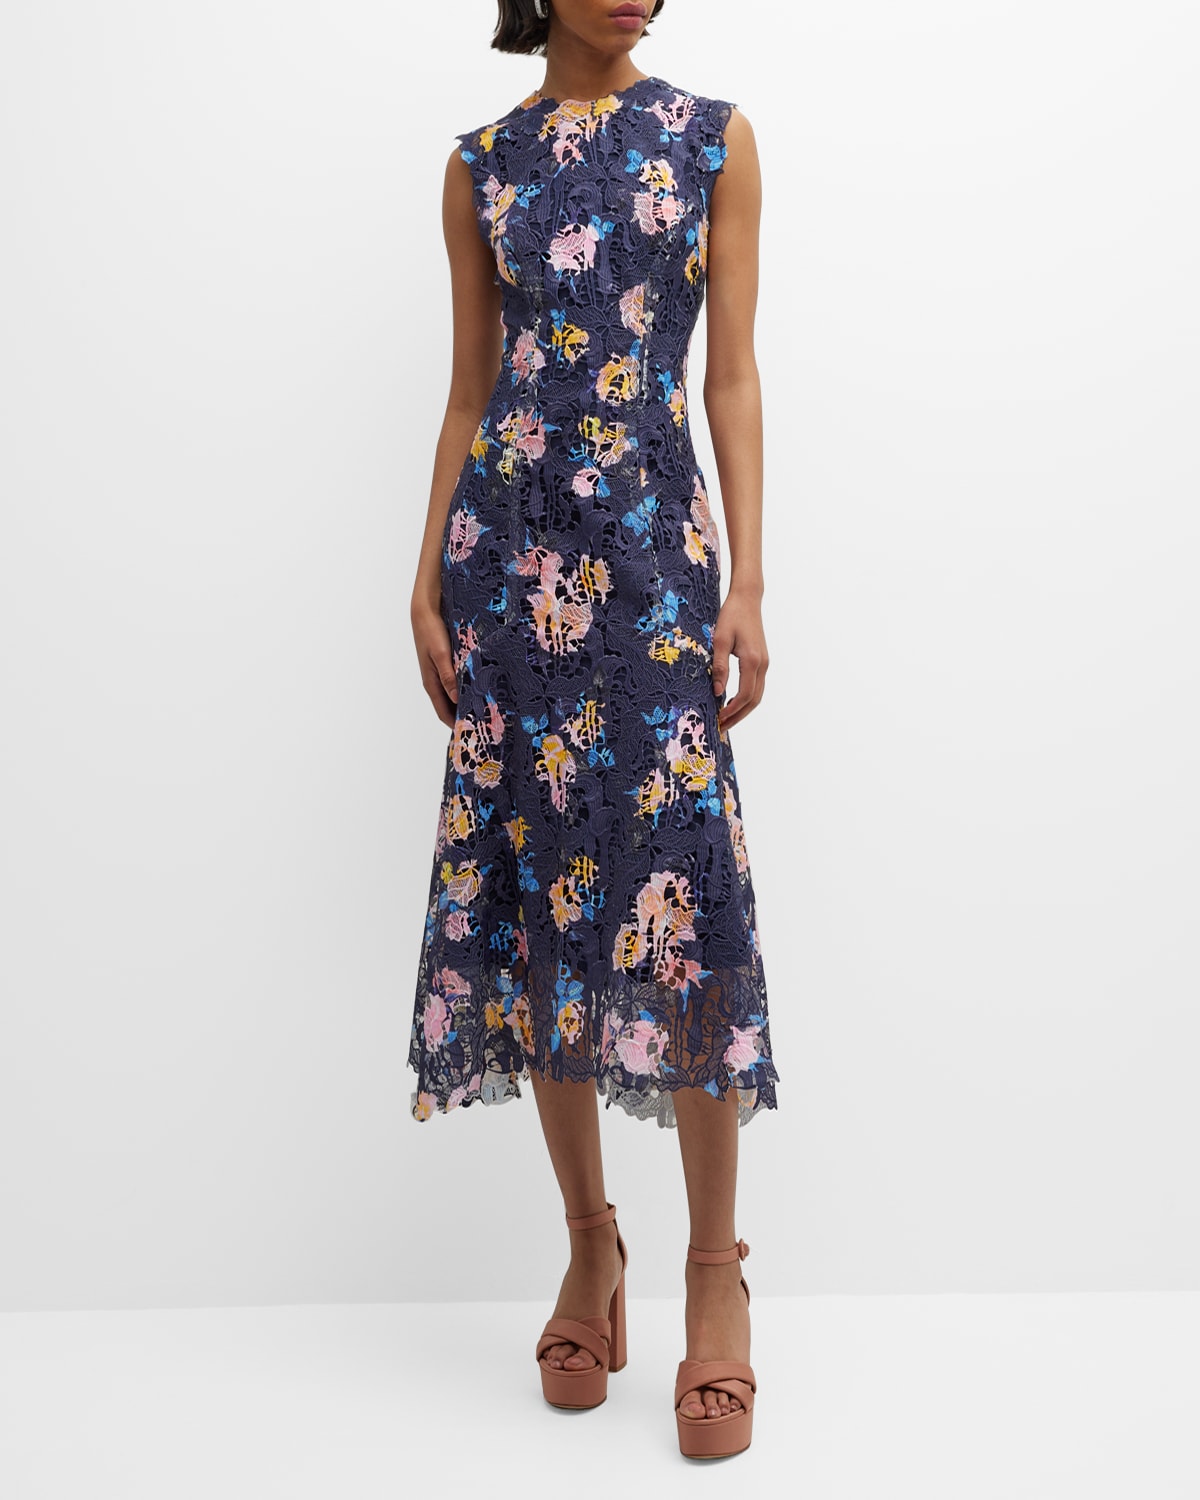 Monique Lhuillier Floral-printed Lace Sleeveless Midi Dress In Navy Multi